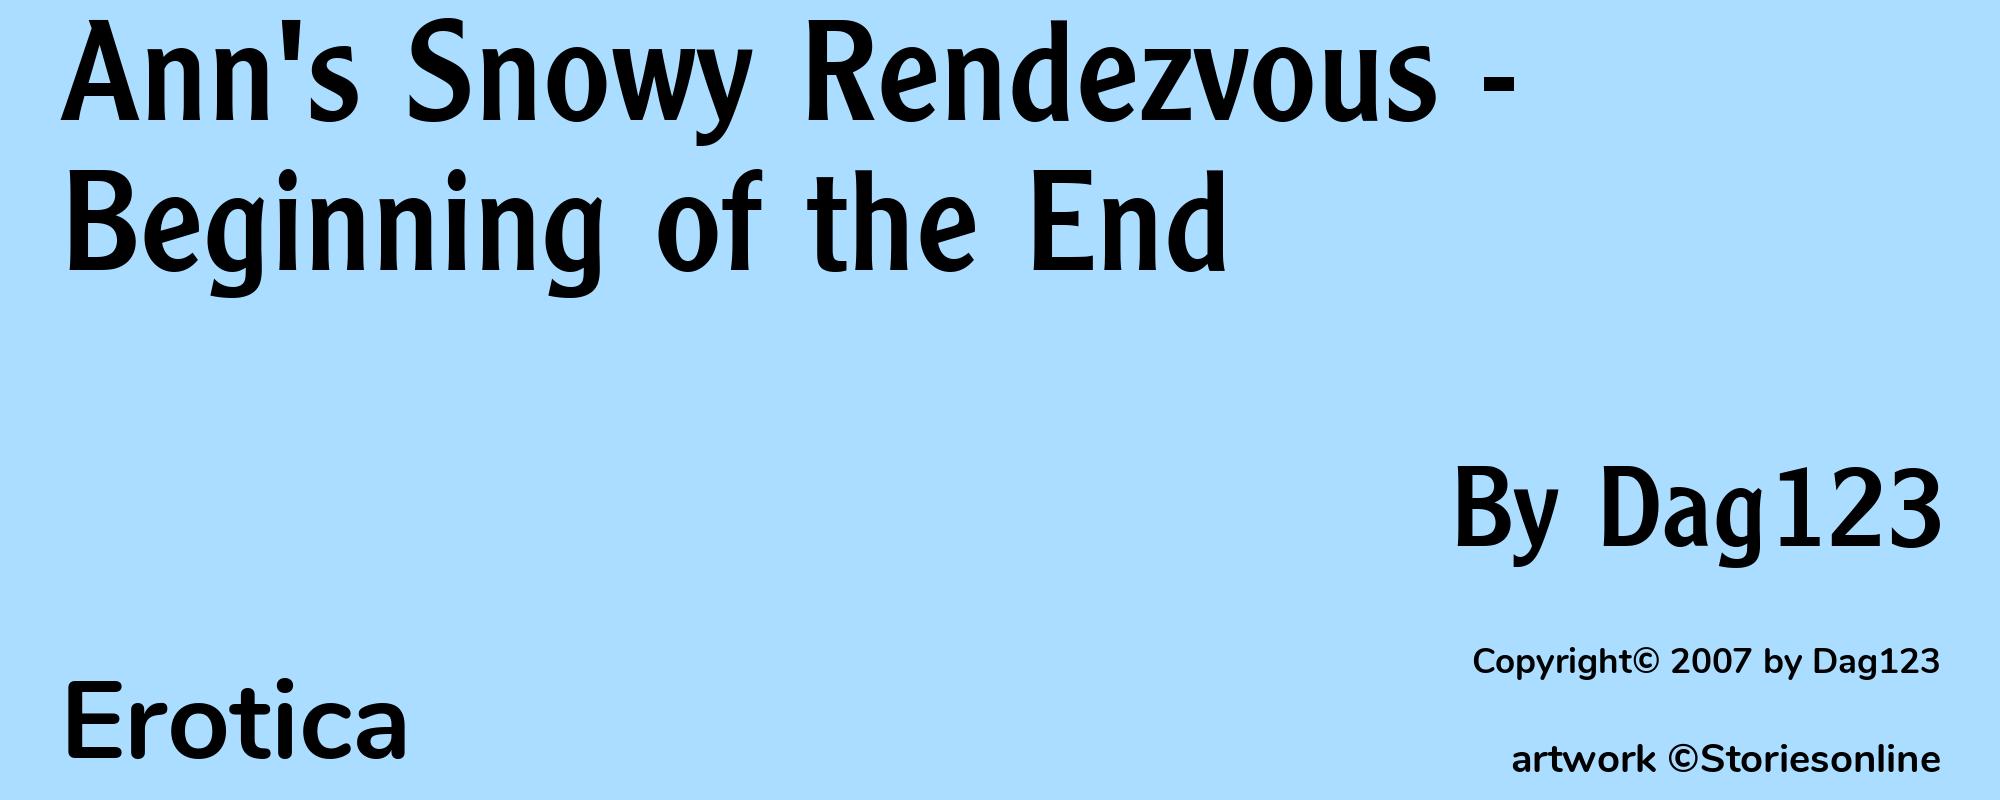 Ann's Snowy Rendezvous - Beginning of the End - Cover